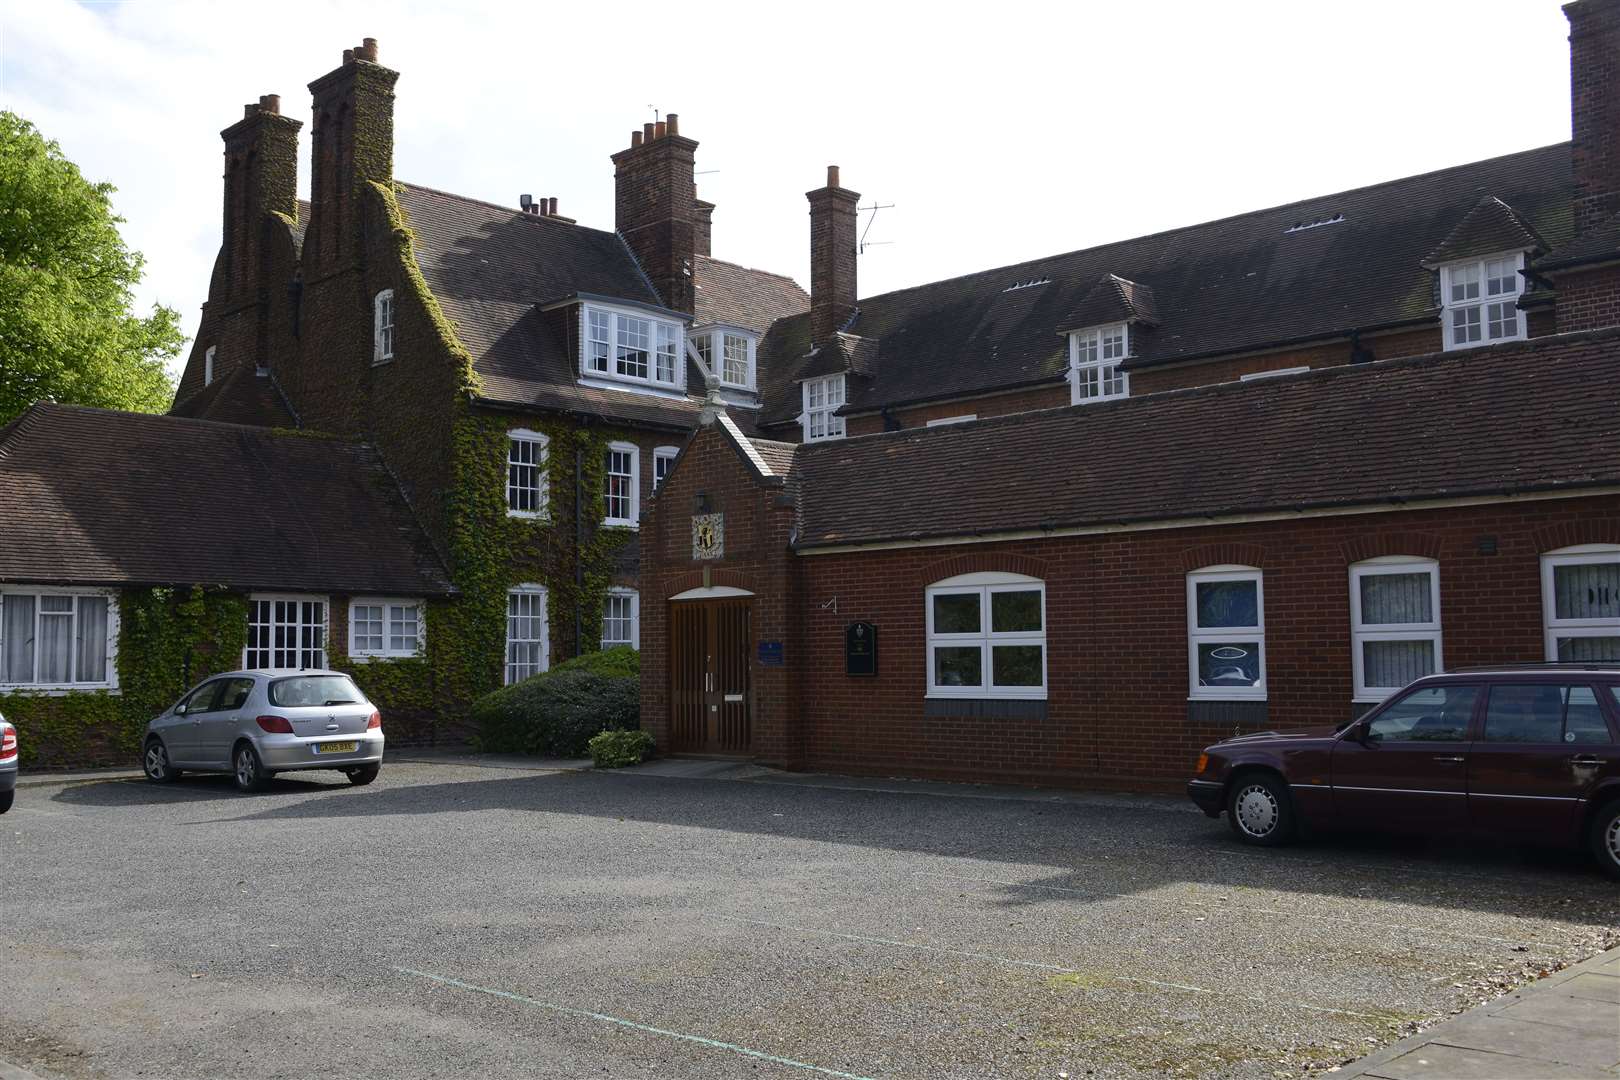 Sir Roger Manwood's School in Sandwich may have to close its boarding facilities